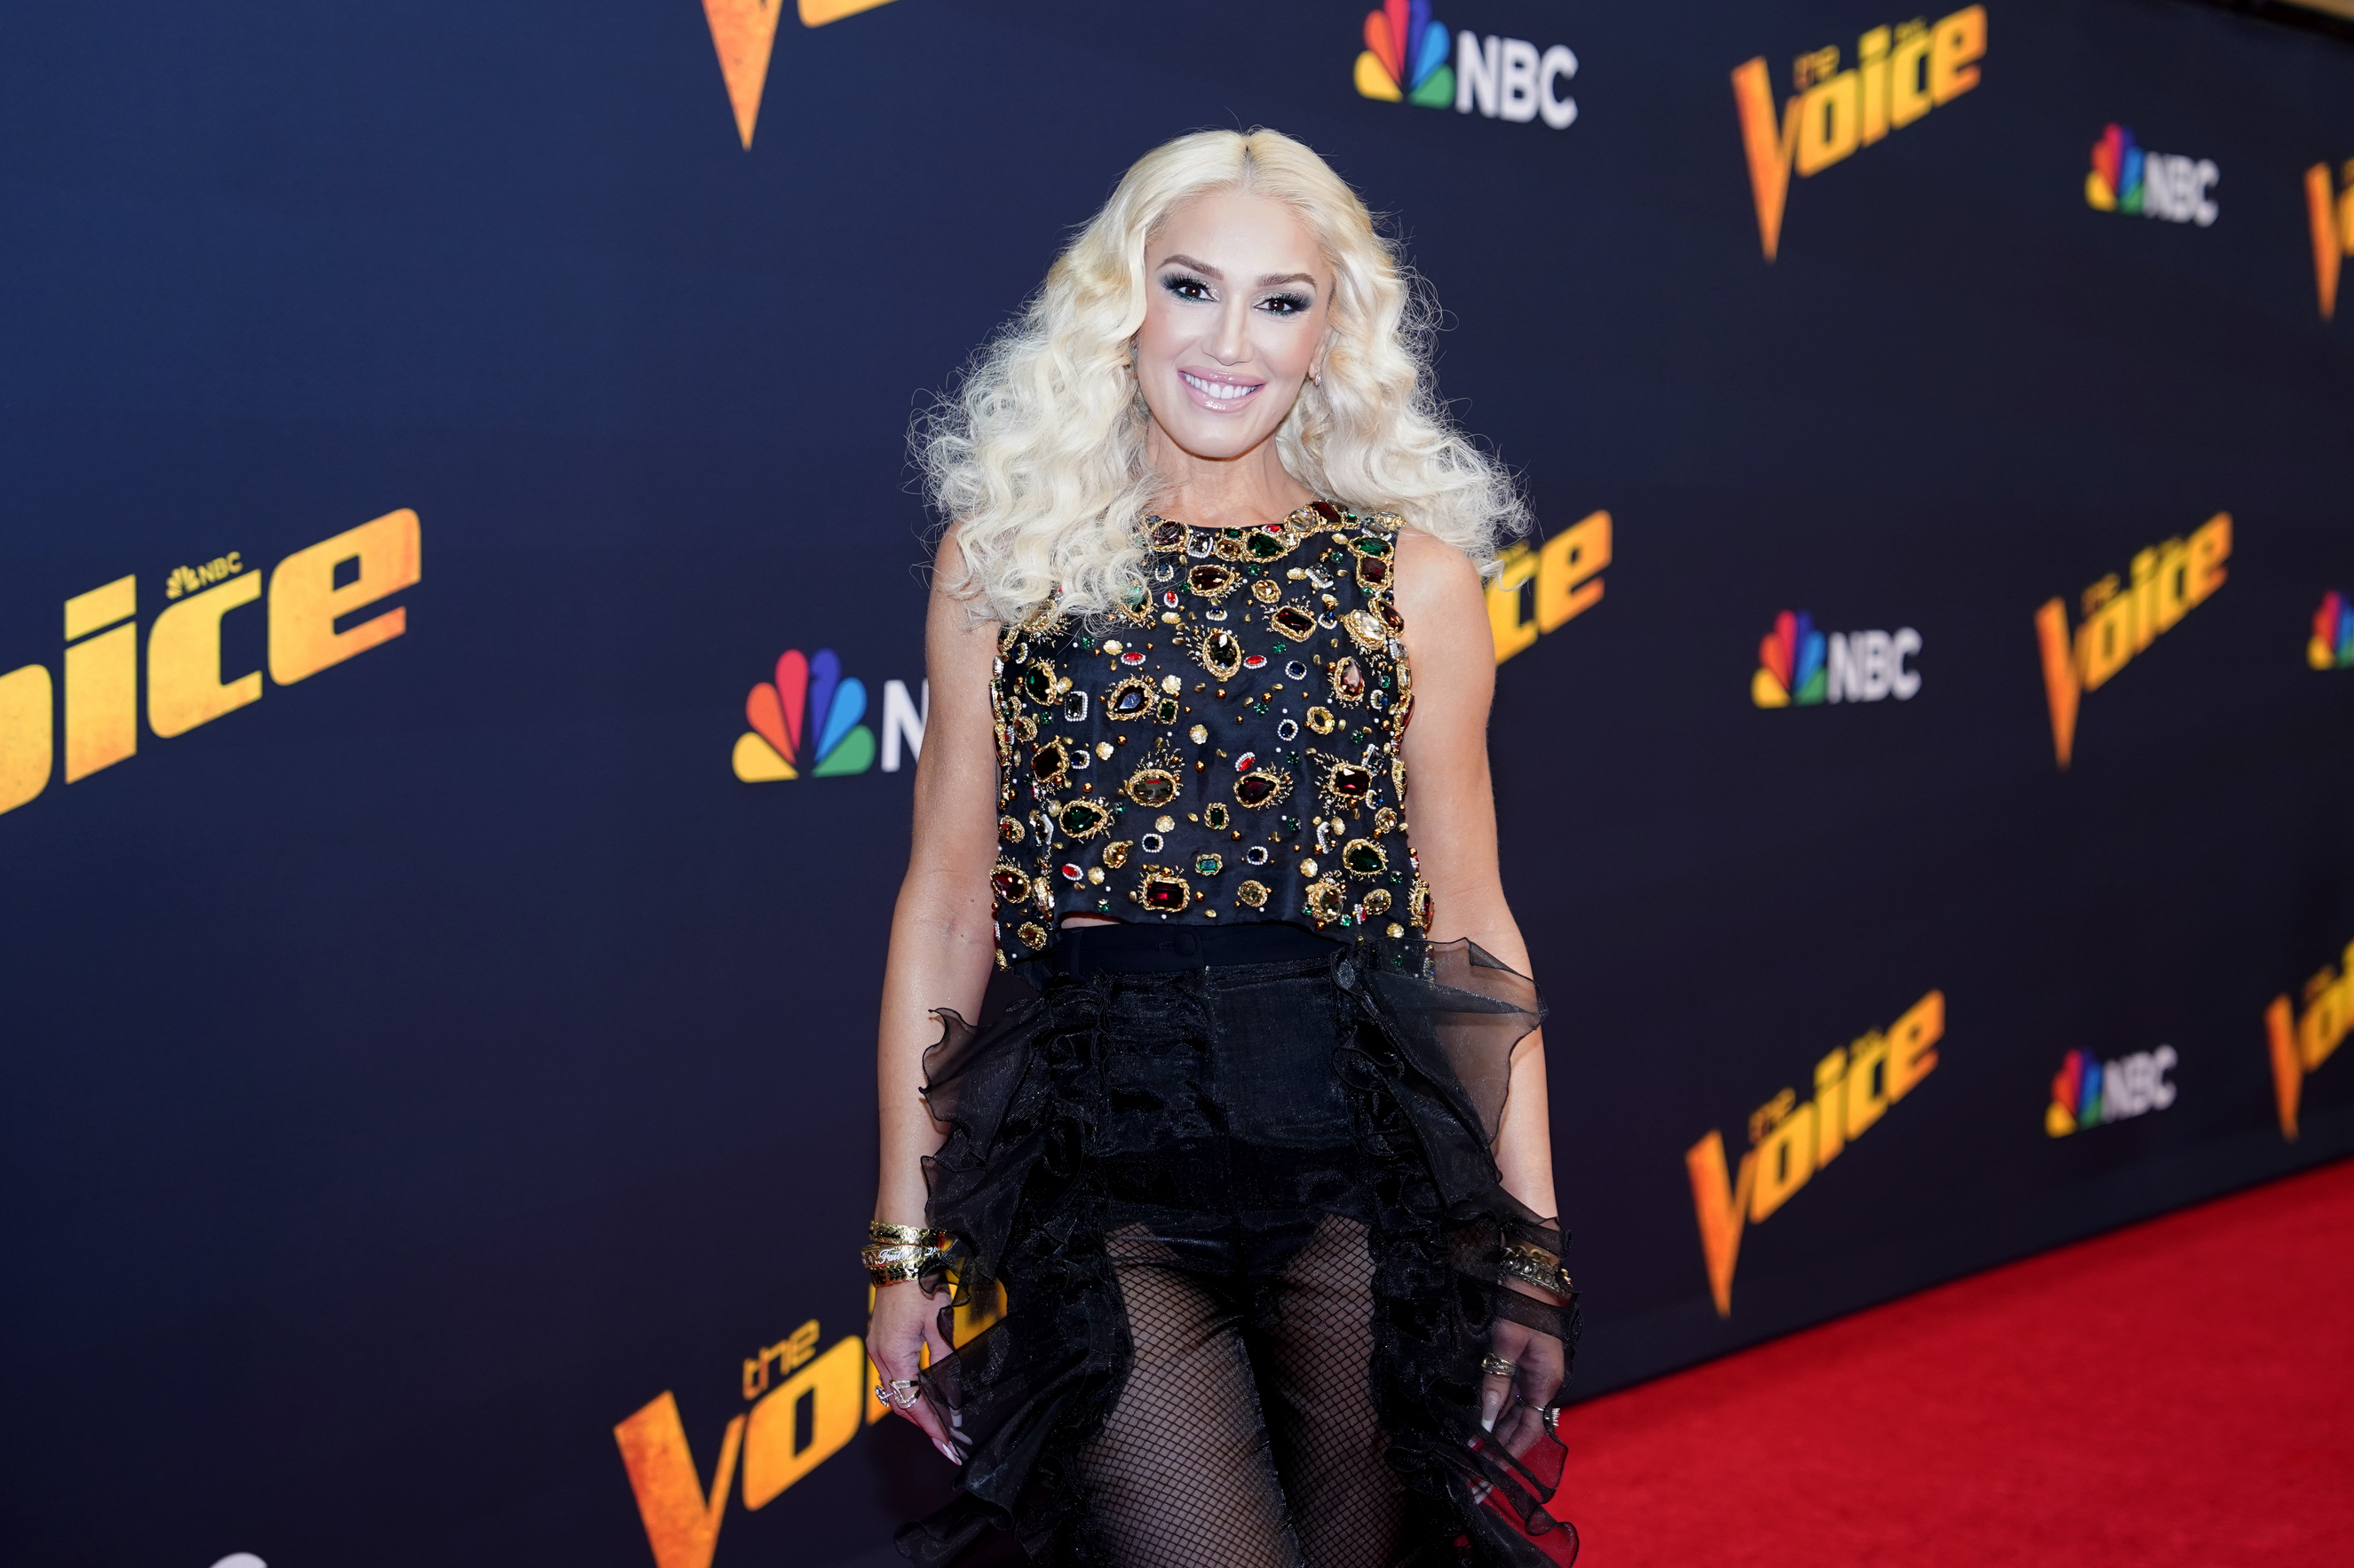 Gwen Stefani on Season 24 of "The Voice" | Source: Getty Images